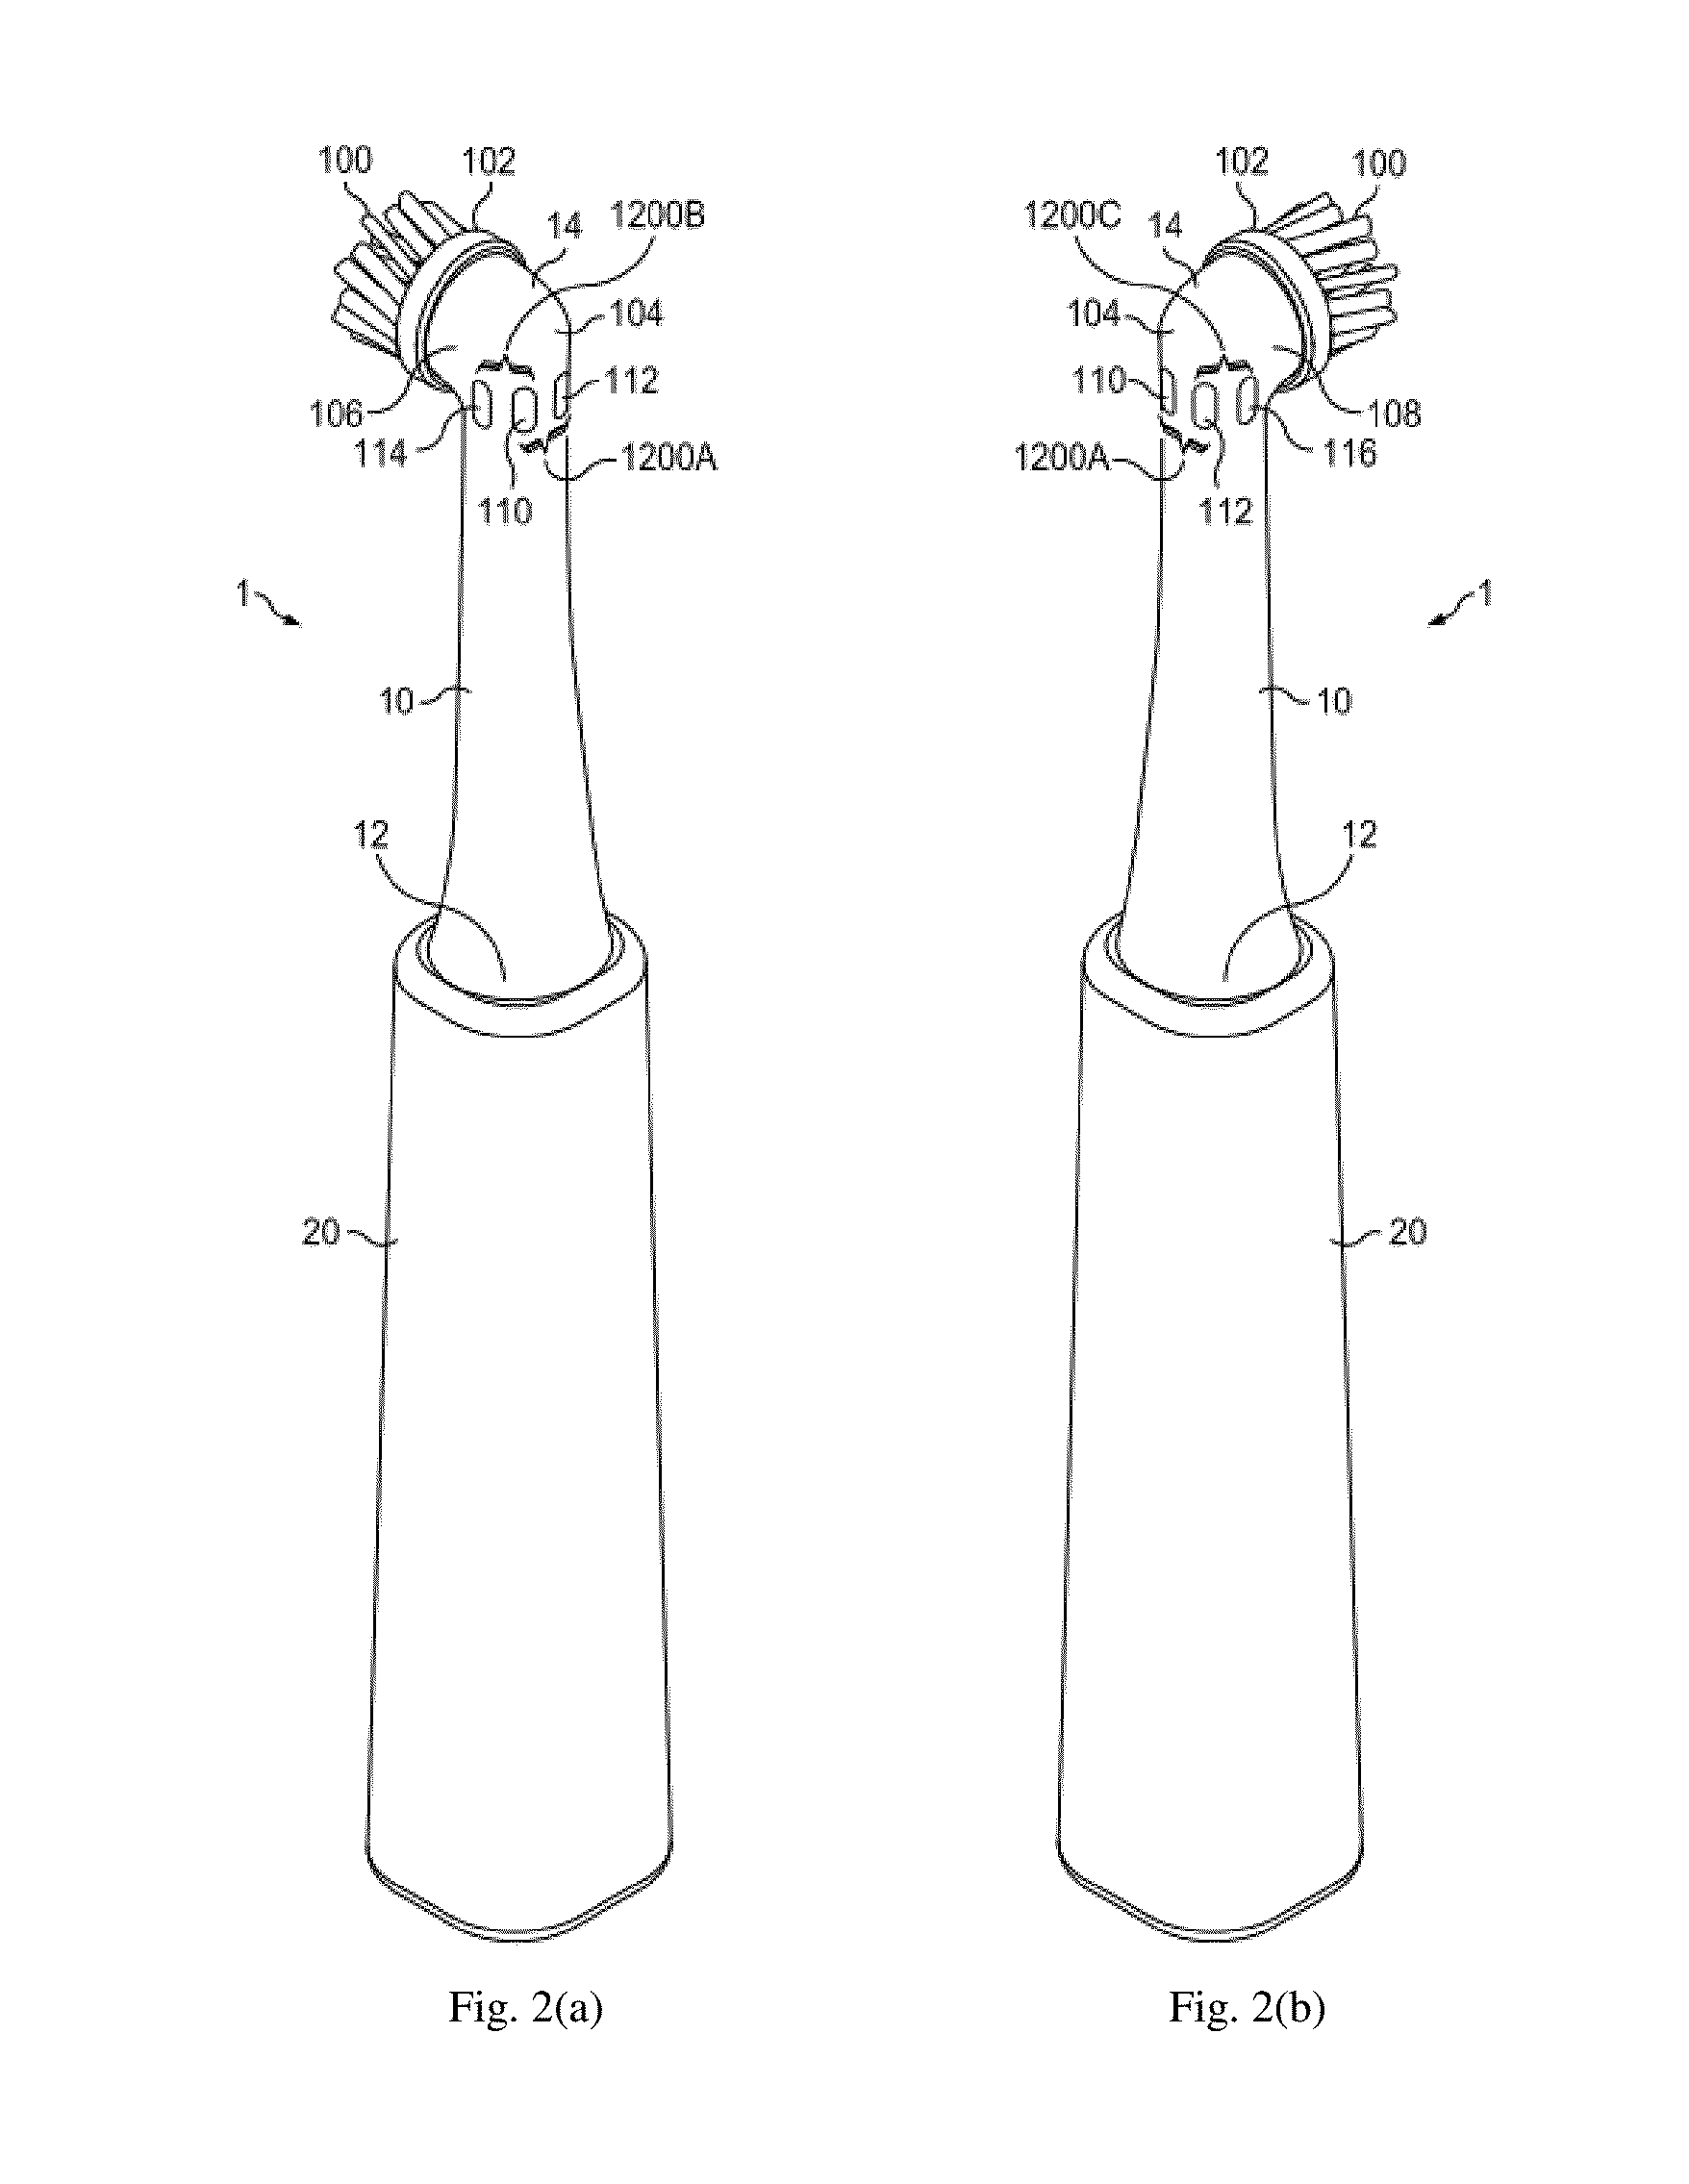 Position detection of an oral care implement